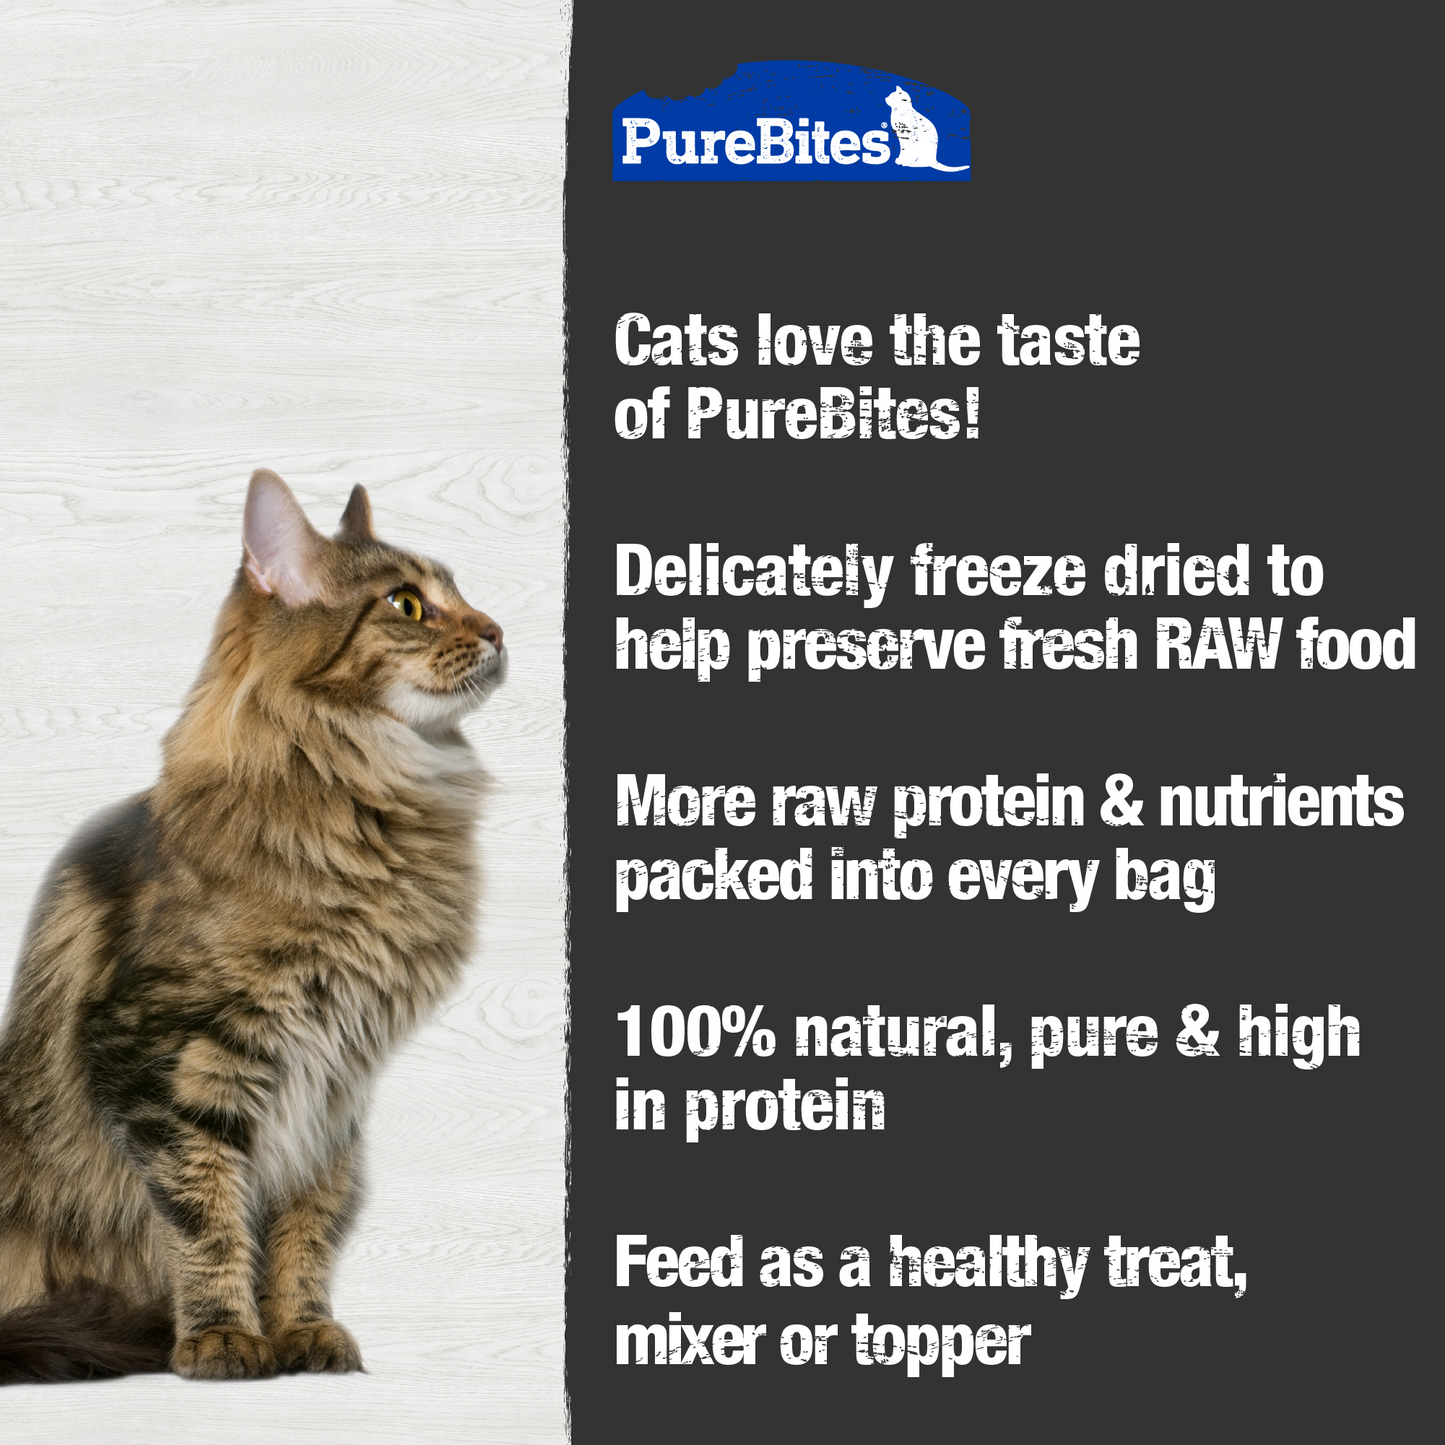 Made fresh & pure means more RAW protein and nutrients packed into every bag. Our ocean medley treats are freeze dried to help preserve their RAW taste, and nutrition, and mirror a cat’s ancestral diet